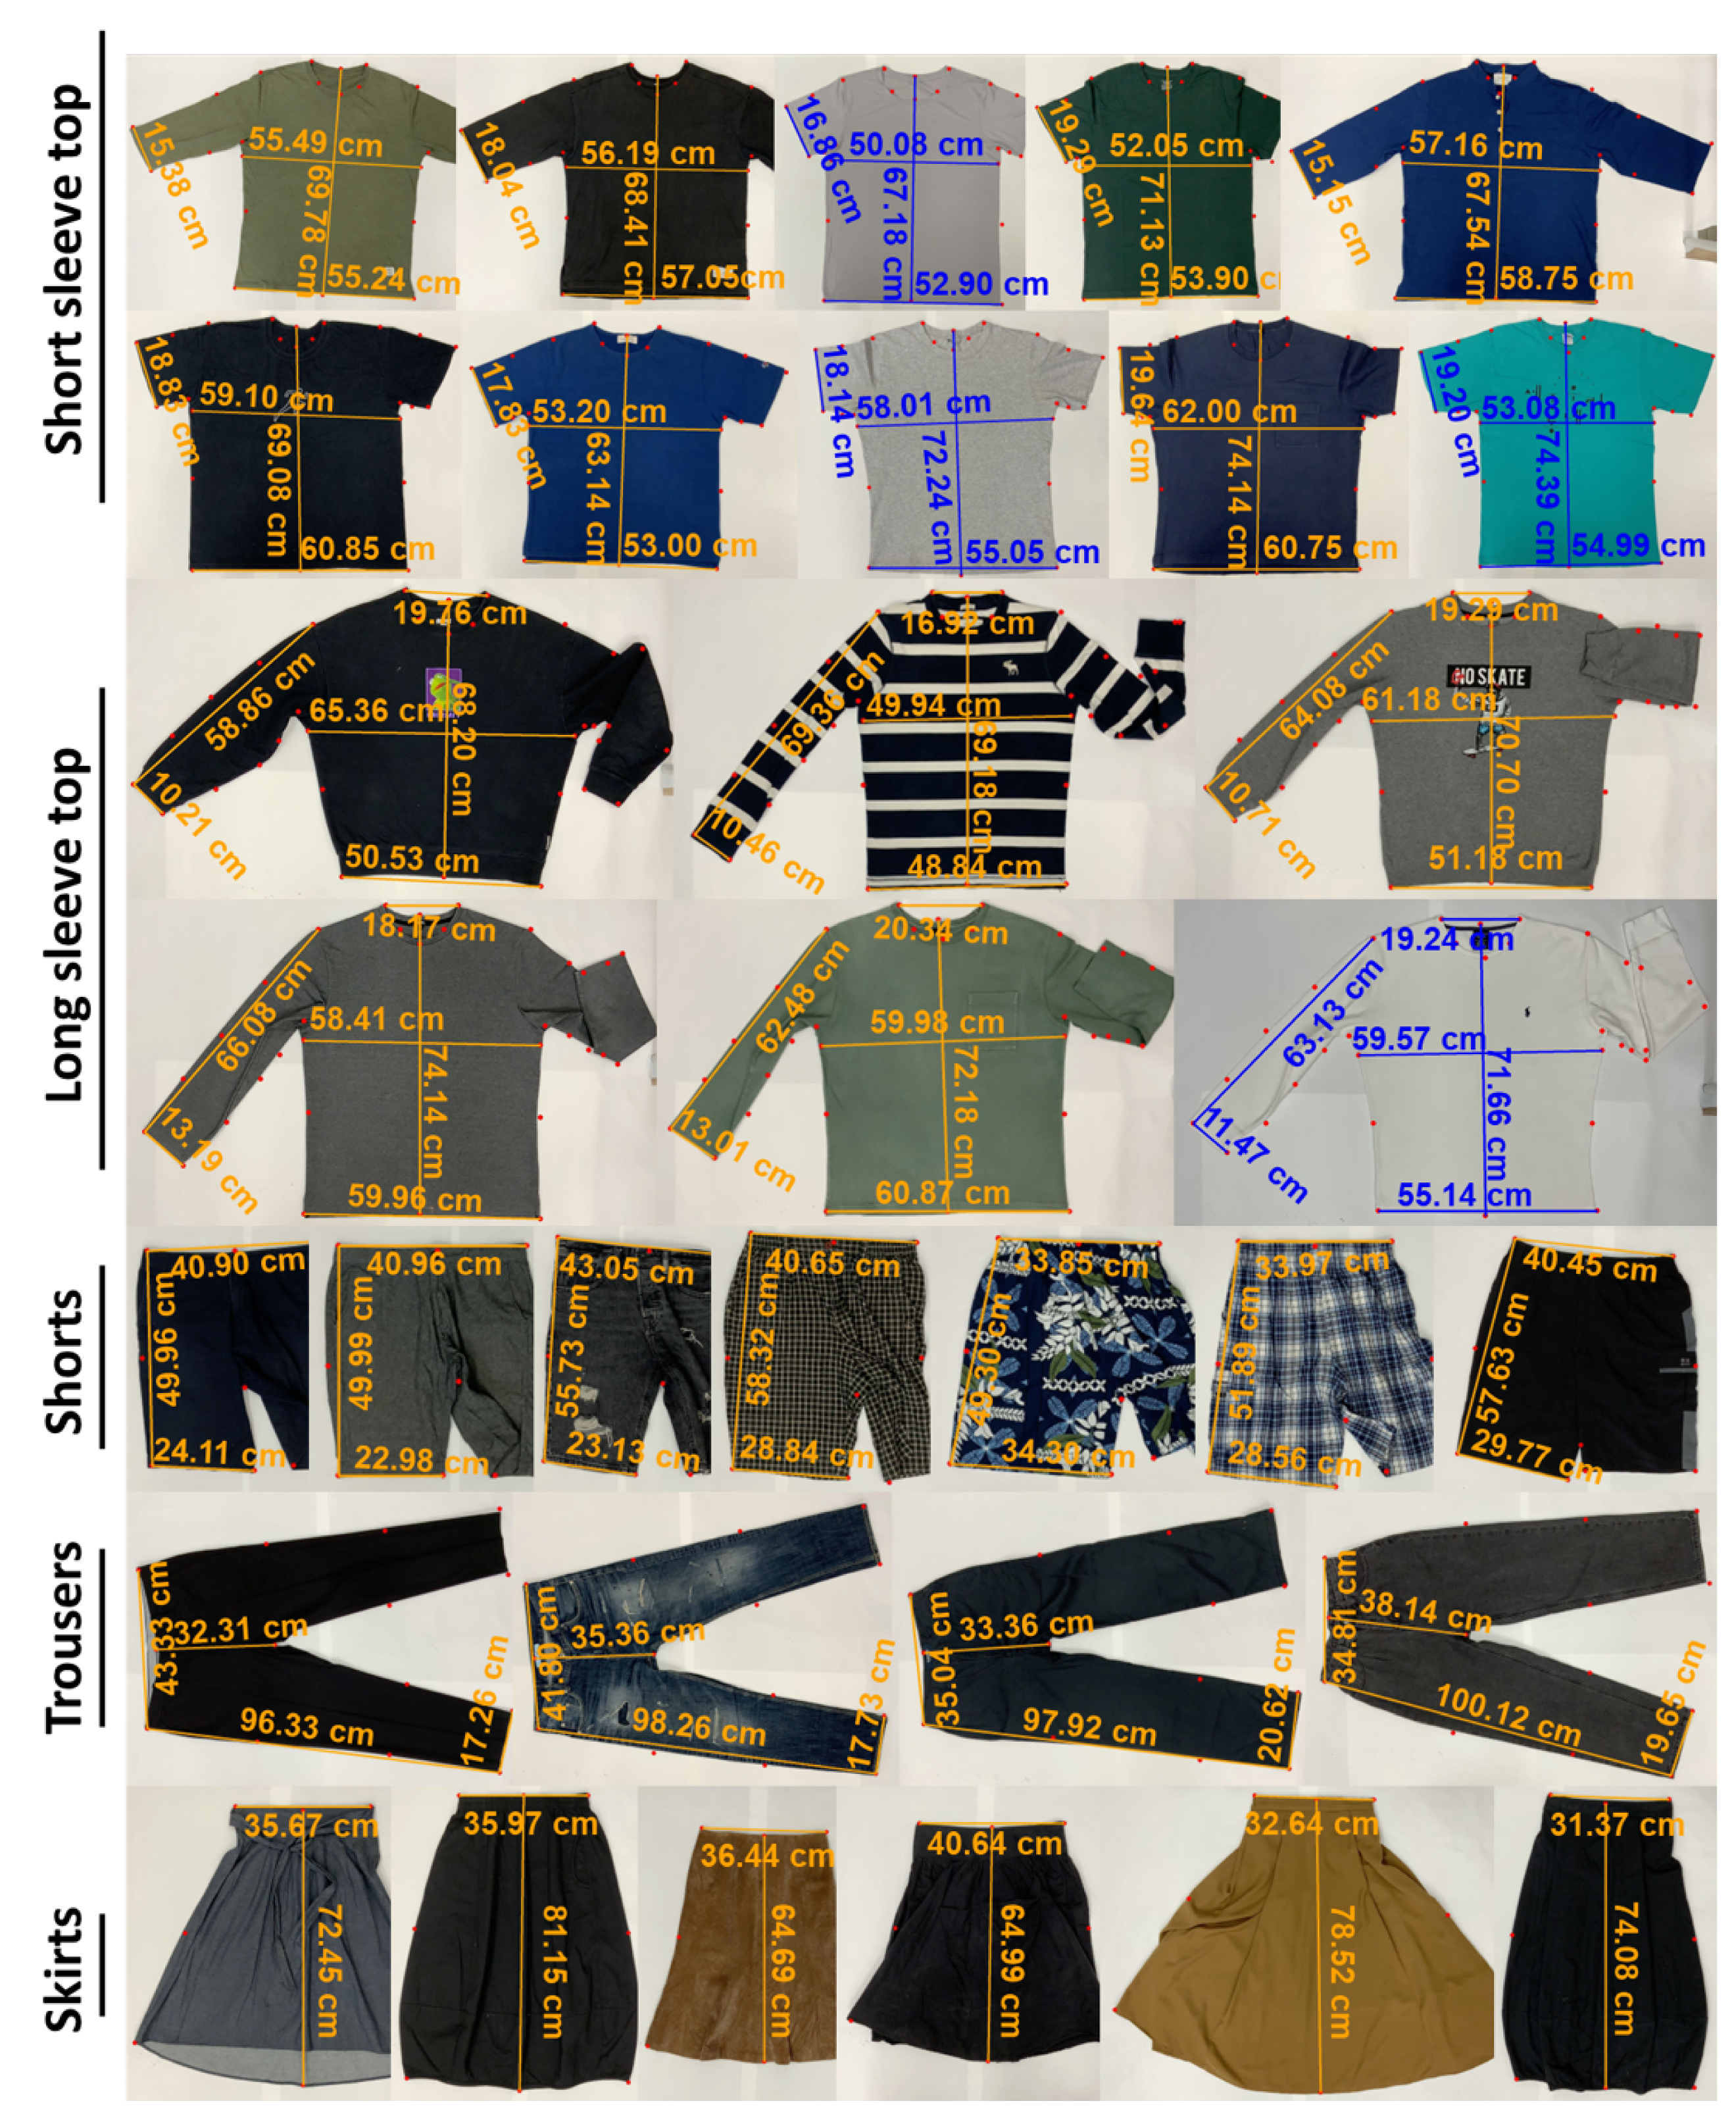 Applied Sciences | Free Full-Text | Automatic Measurements of Garment Sizes  Using Computer Vision Deep Learning Models and Point Cloud Data | Rundhalsshirts